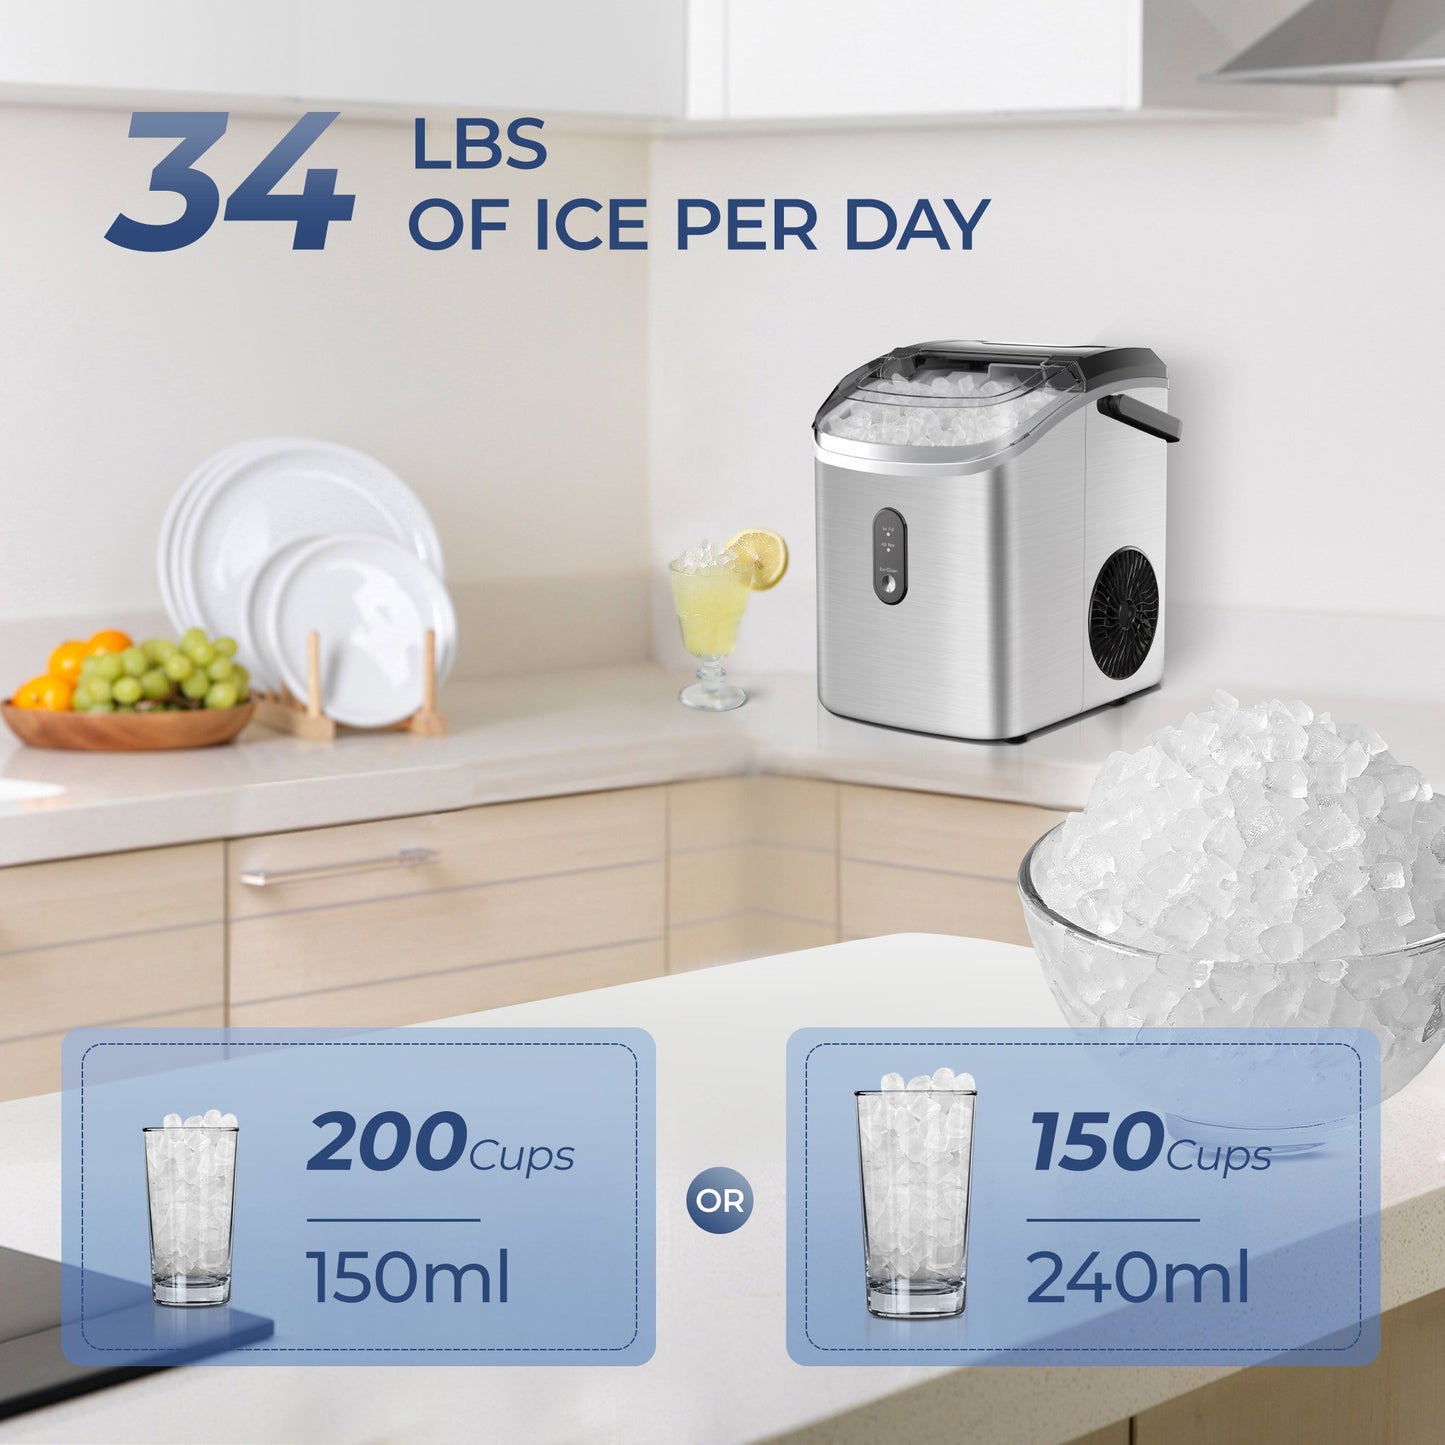 Simzlife Nugget Ice Maker Countertop with Soft Chewable Ice, 34lbs/24H, Ready in 6 Mins, Self-Cleaning, Pebble Portable Ice Machine for Home,Kitchen,Office, Silver